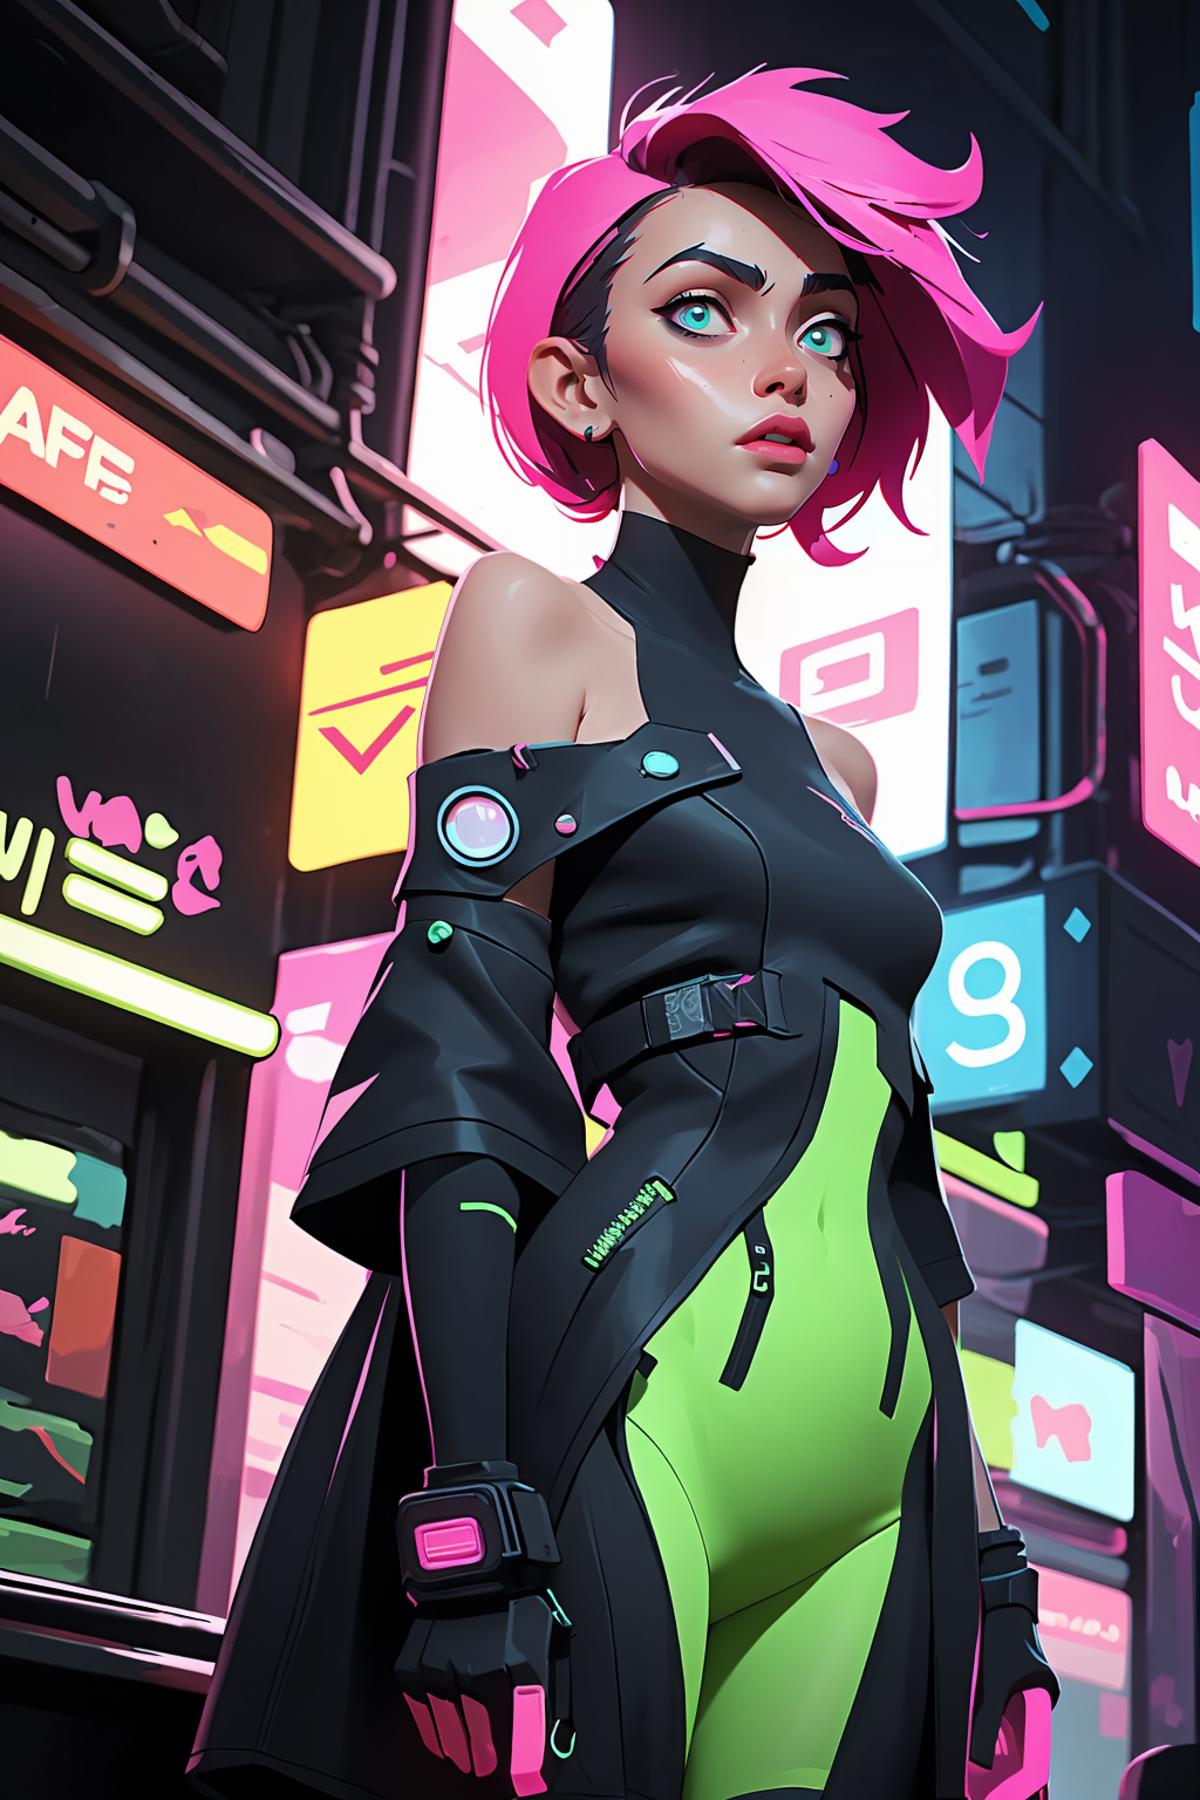 A Pink-Haired Cyberpunk Woman in a Black and Green Outfit.